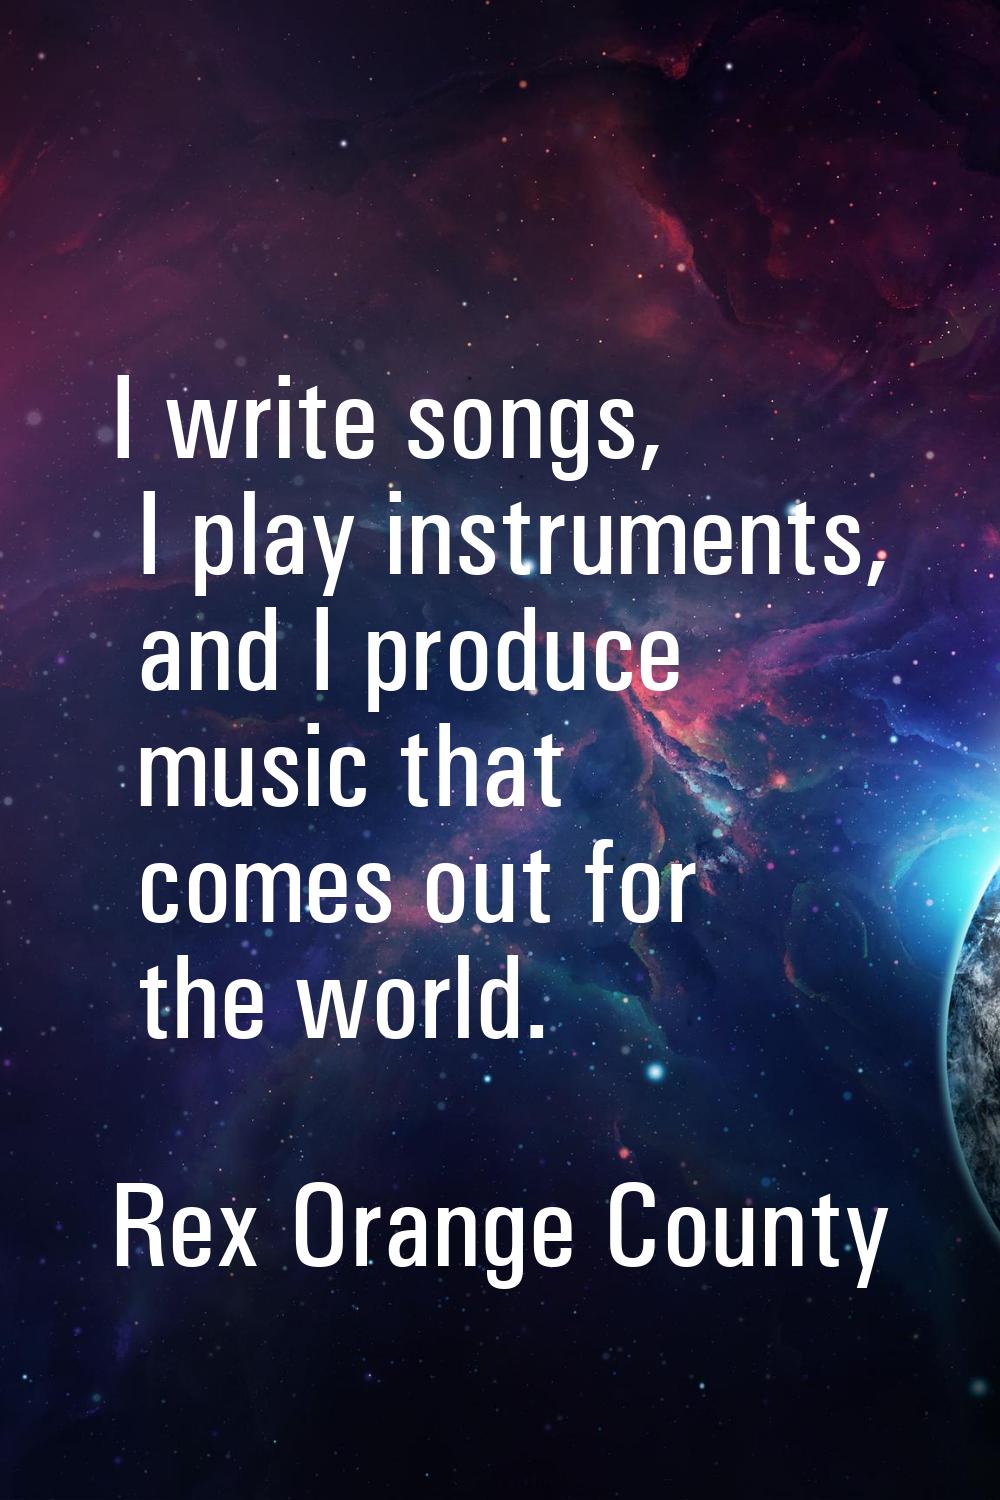 I write songs, I play instruments, and I produce music that comes out for the world.